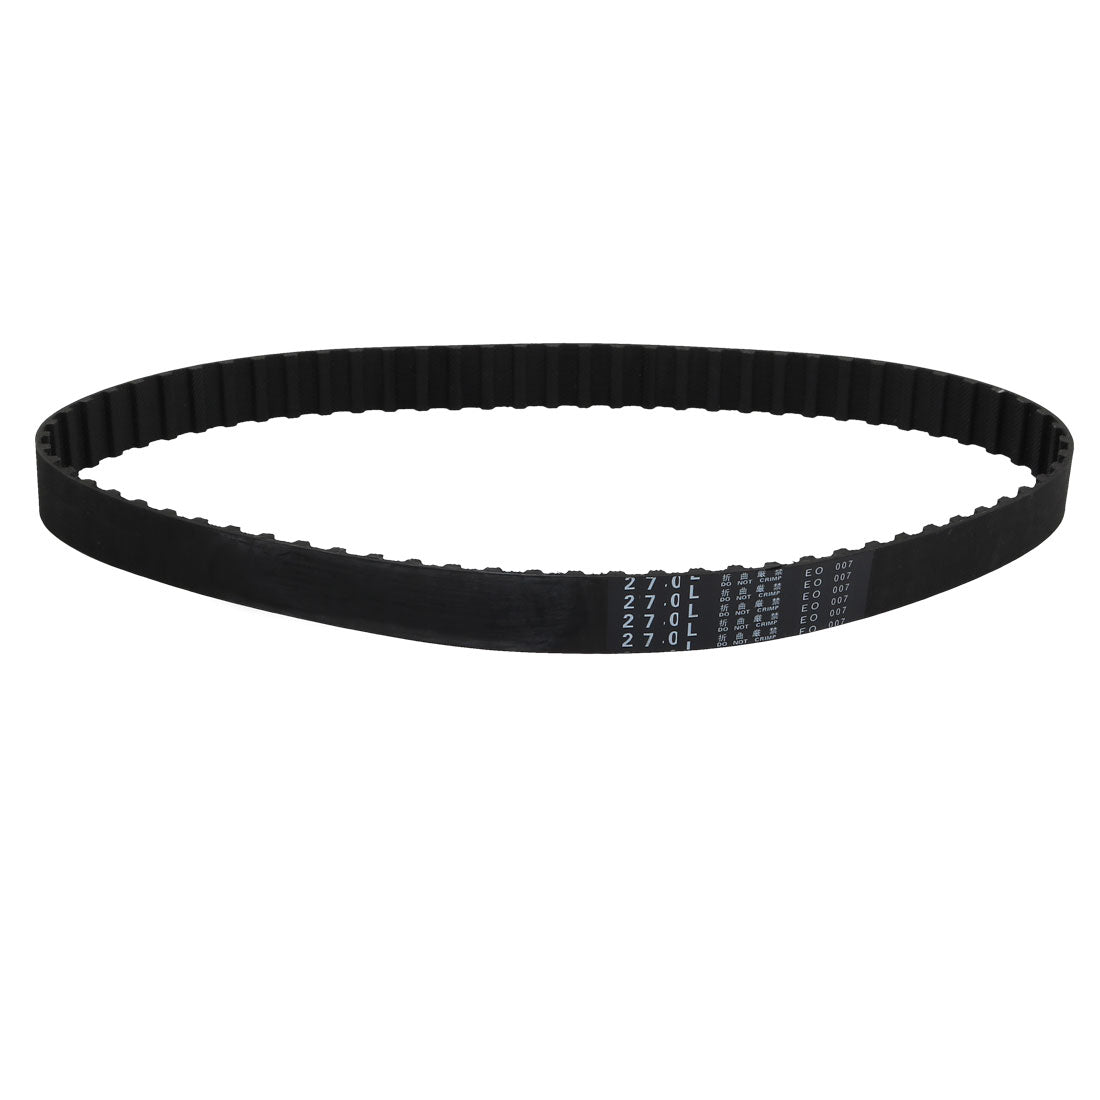 uxcell Uxcell 270L 72 Teeth Engine Timing Belt Rubber Geared-Belt 686mm Girth 20mm Width